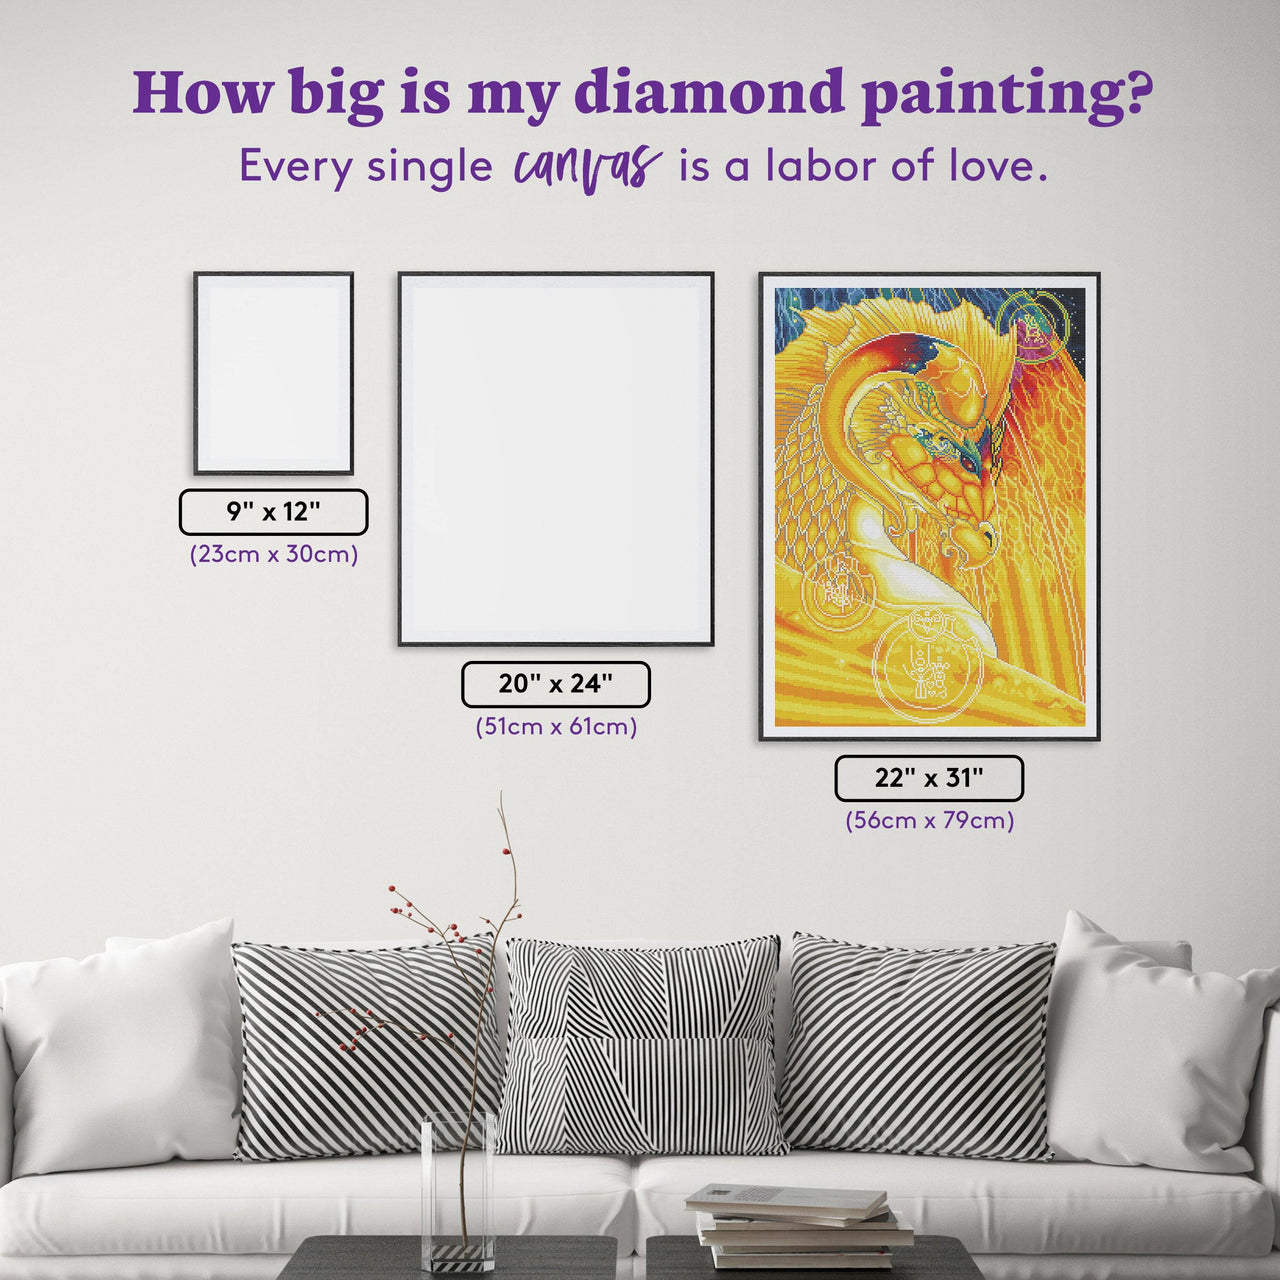 Diamond Painting The Lightweaver 22" x 31" (56cm x 79cm) / Round With 30 Colors Including 4 ABs / 55,919